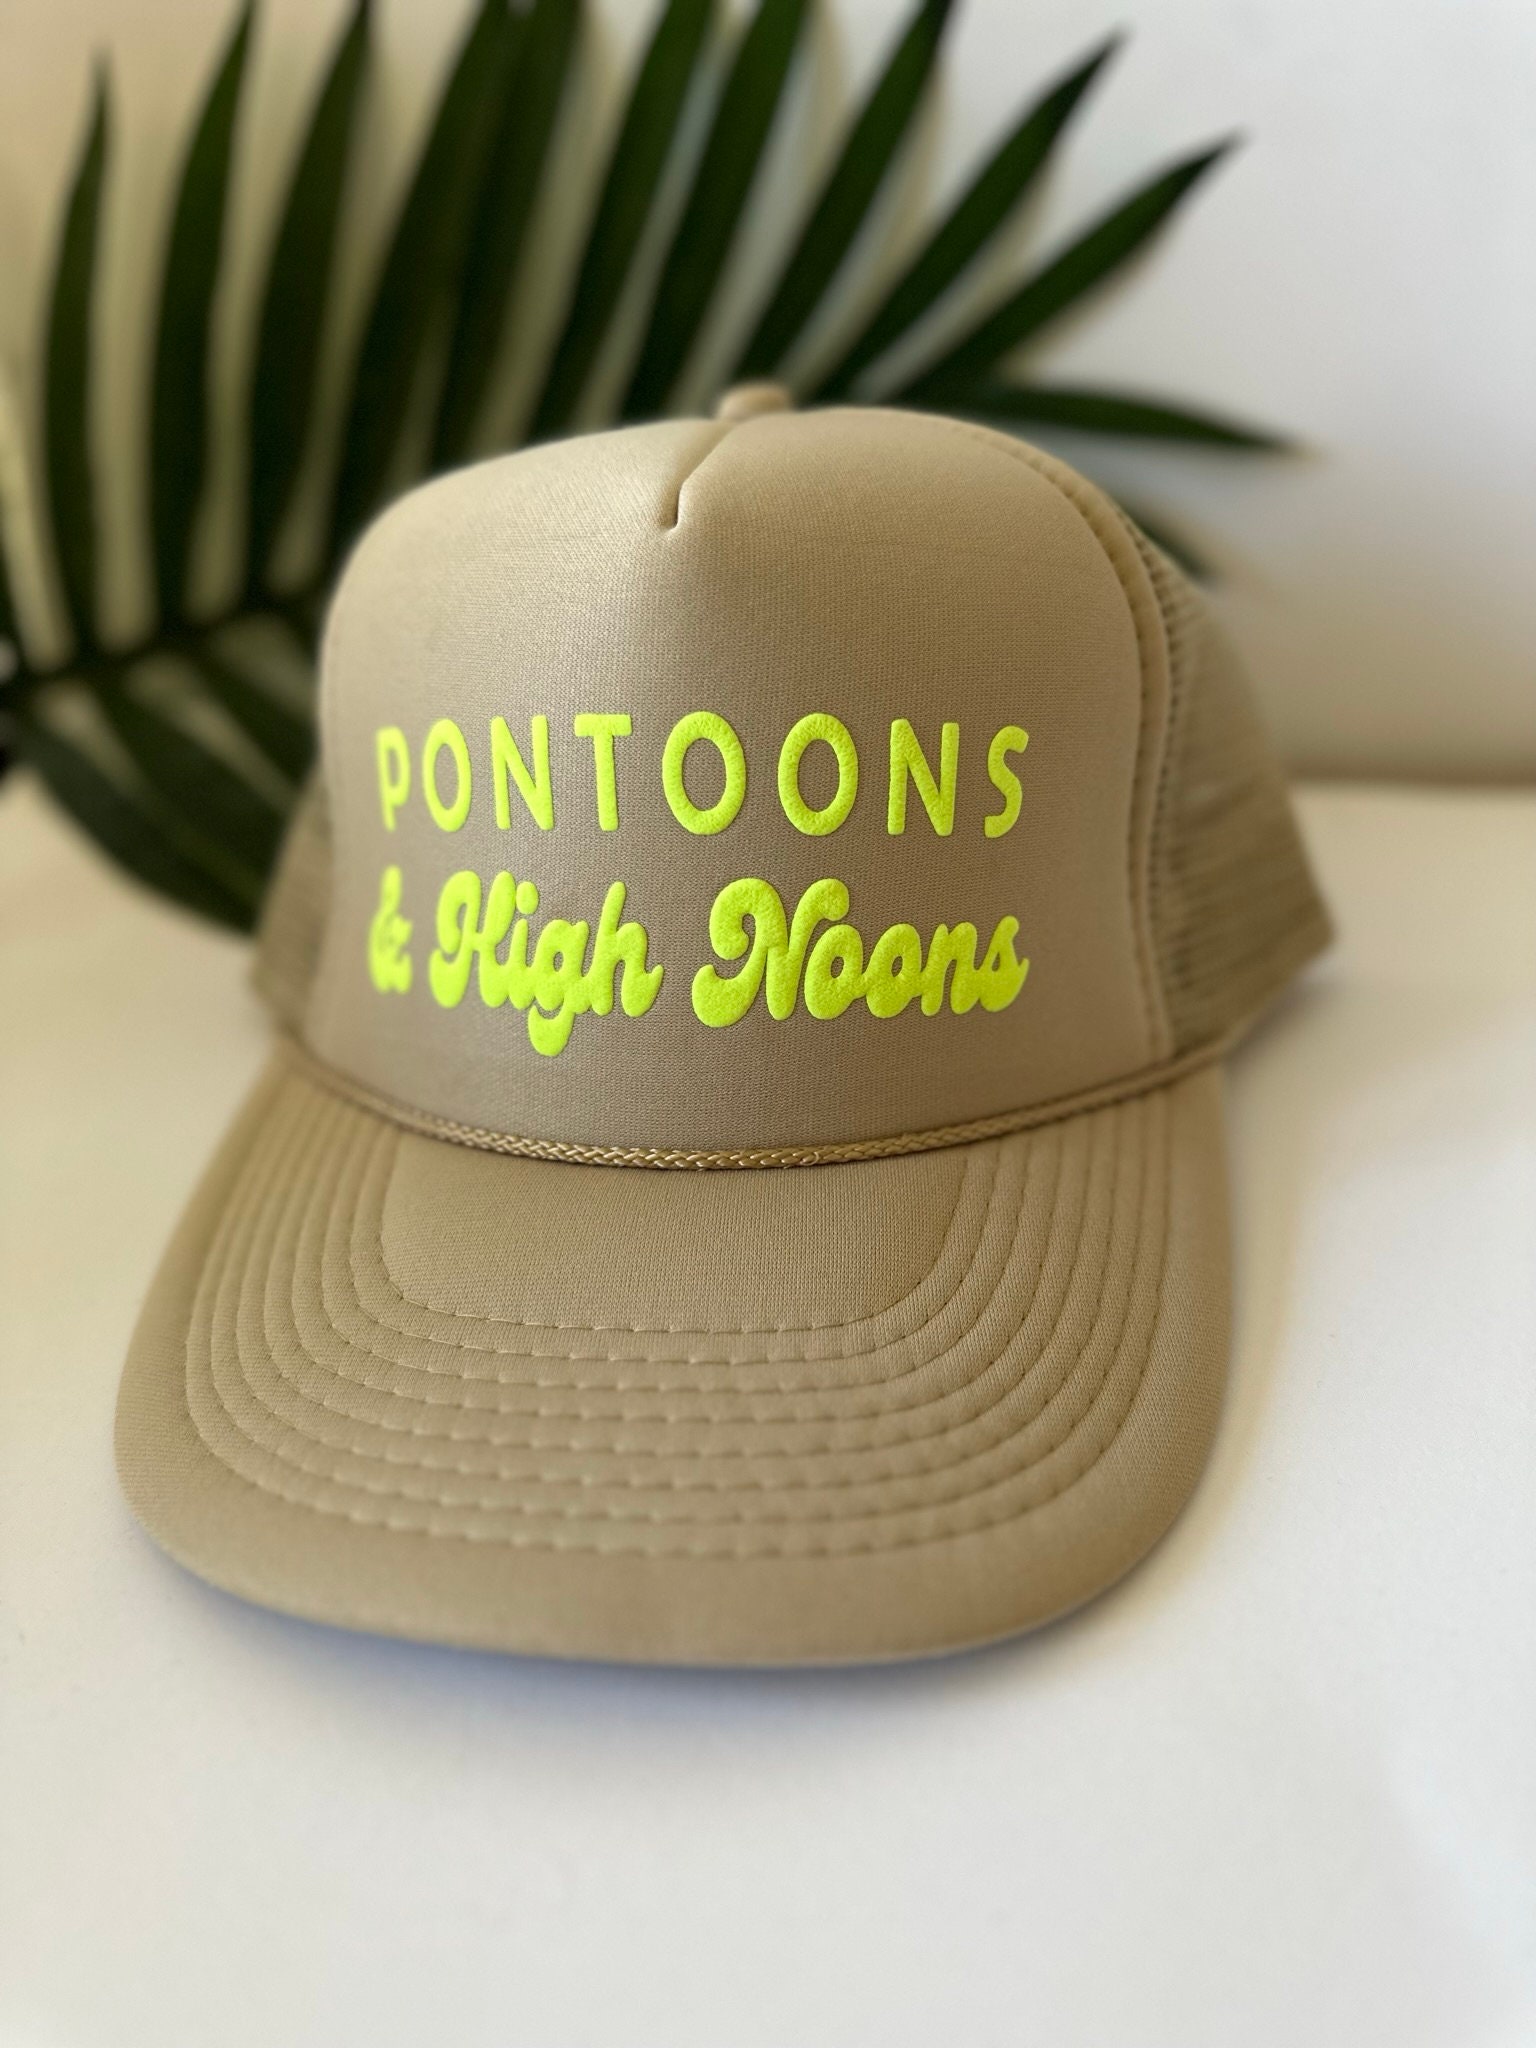 Pontoons and High Noons Trucker Hat, Womens Trucker Hat, Lake Hat, River Hat